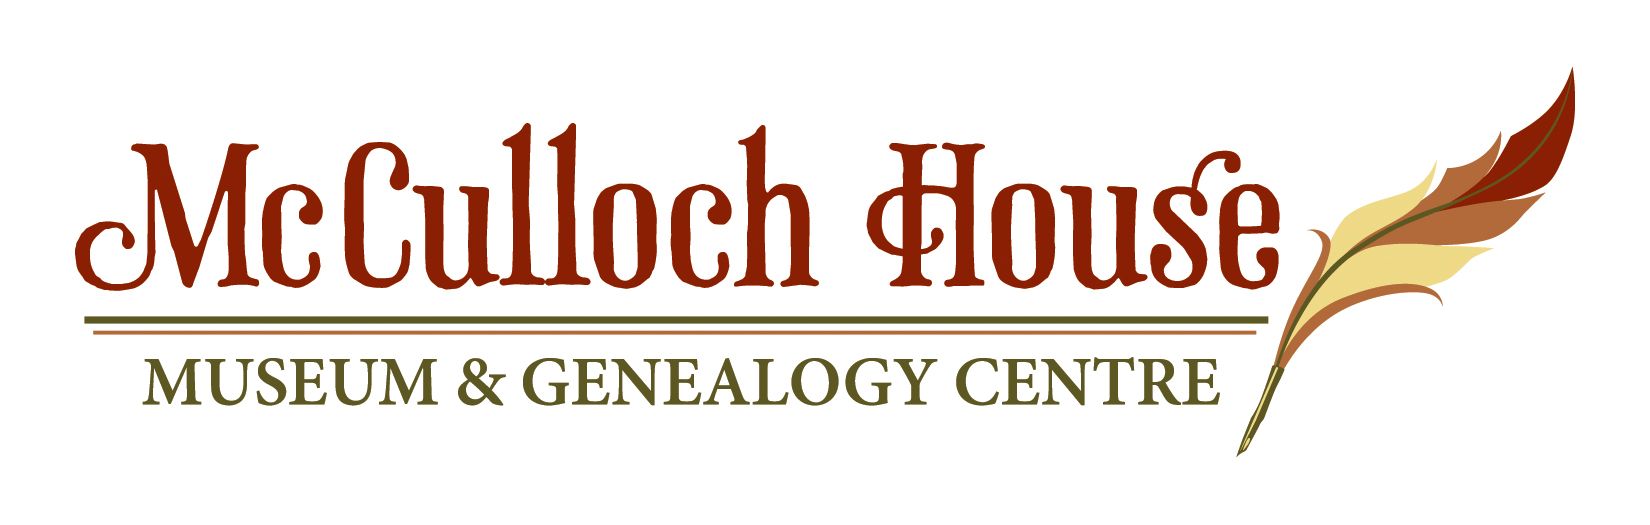 mcculloch-house-museum-genealogy-ctr.square.site